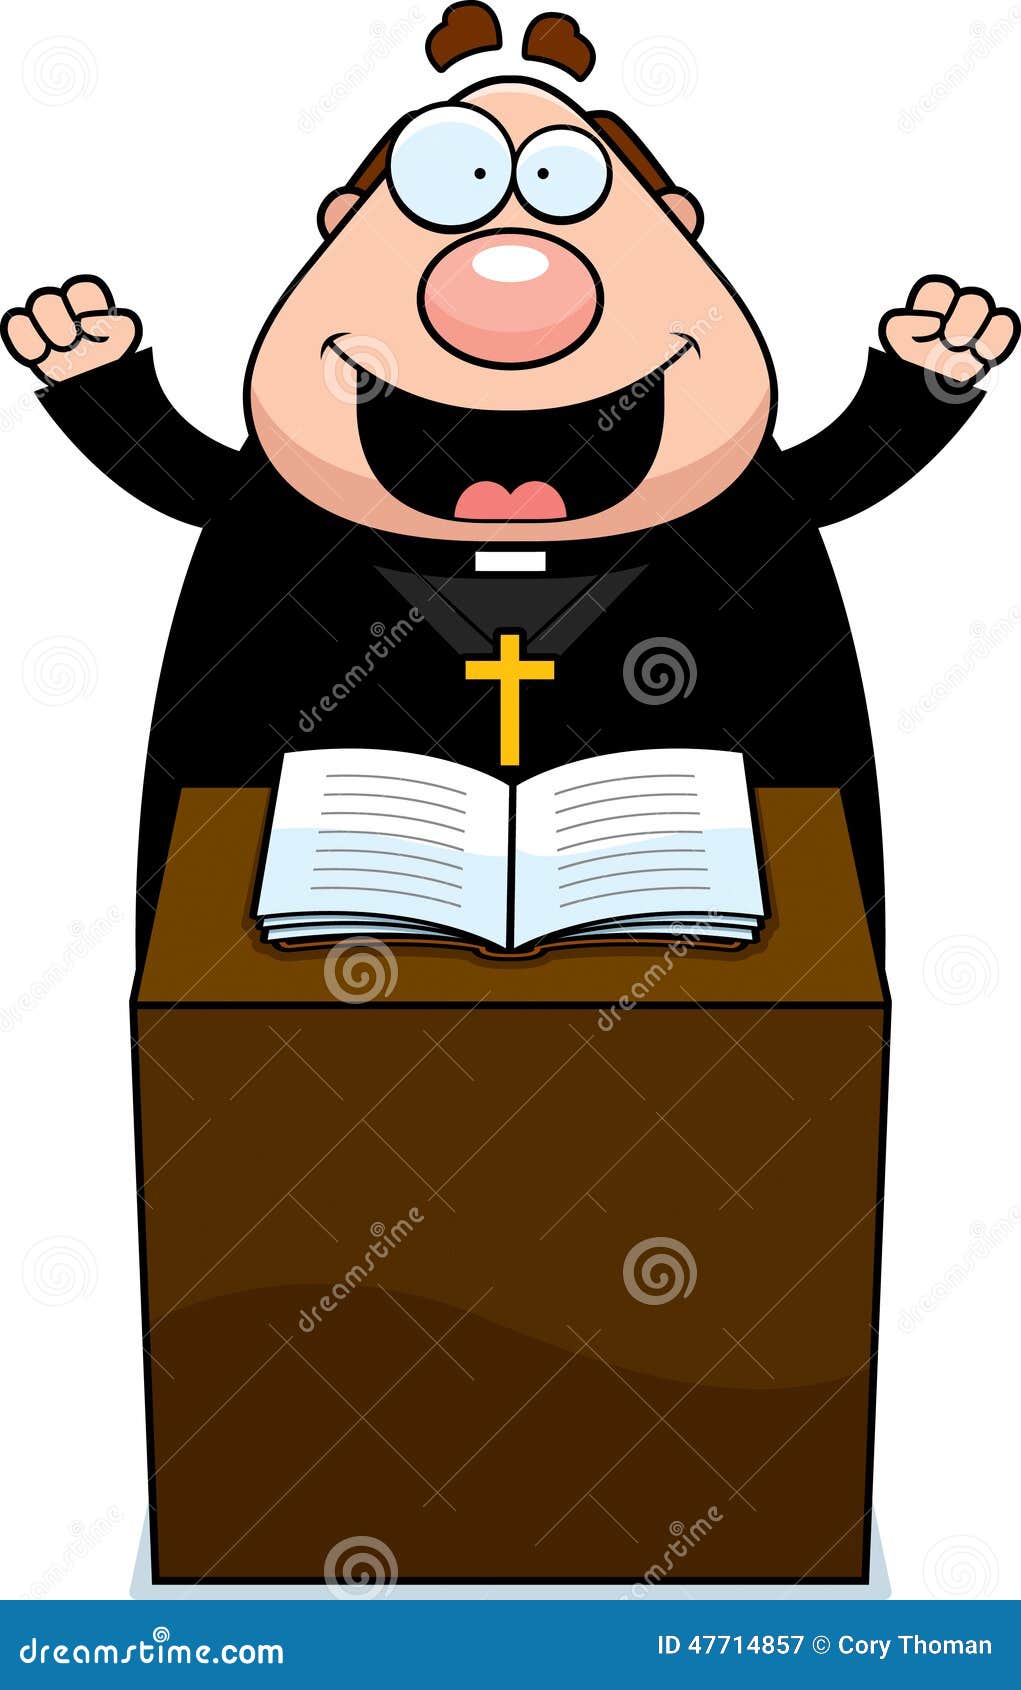 funny priest clipart - photo #9